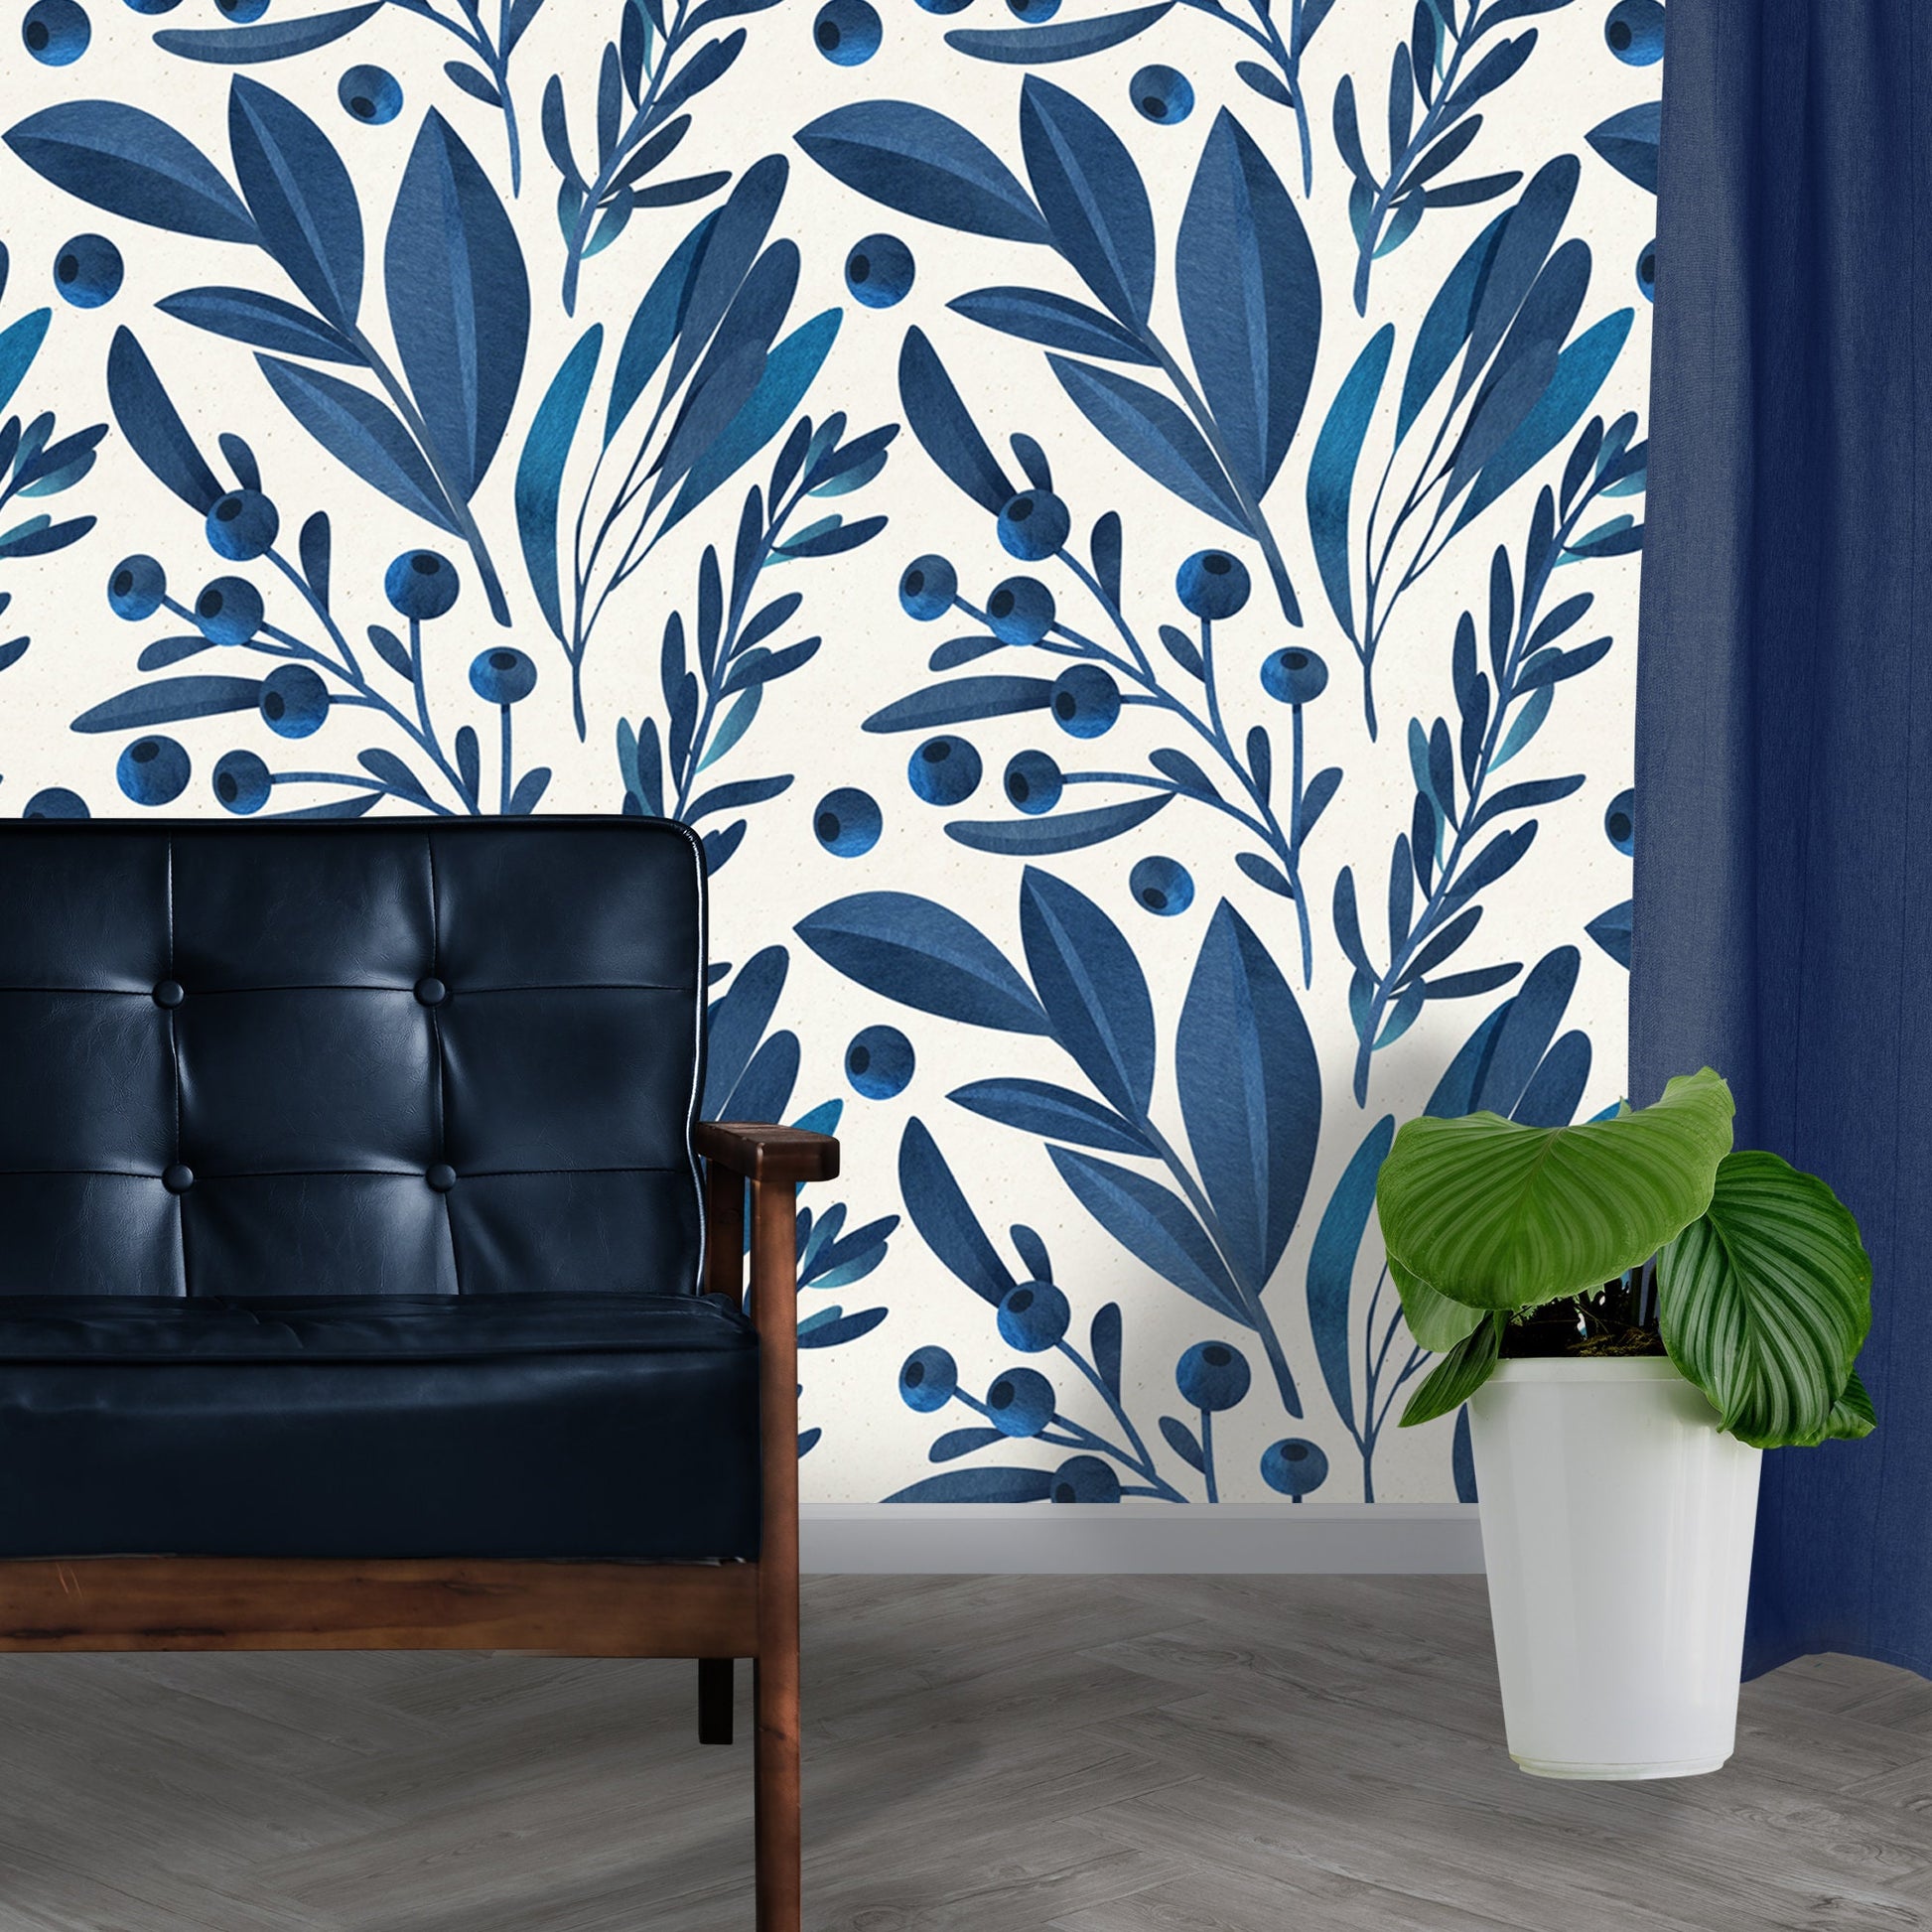 Removable Wallpaper Peel and Stick Wallpaper Mural Blue Leaves Wall Paper